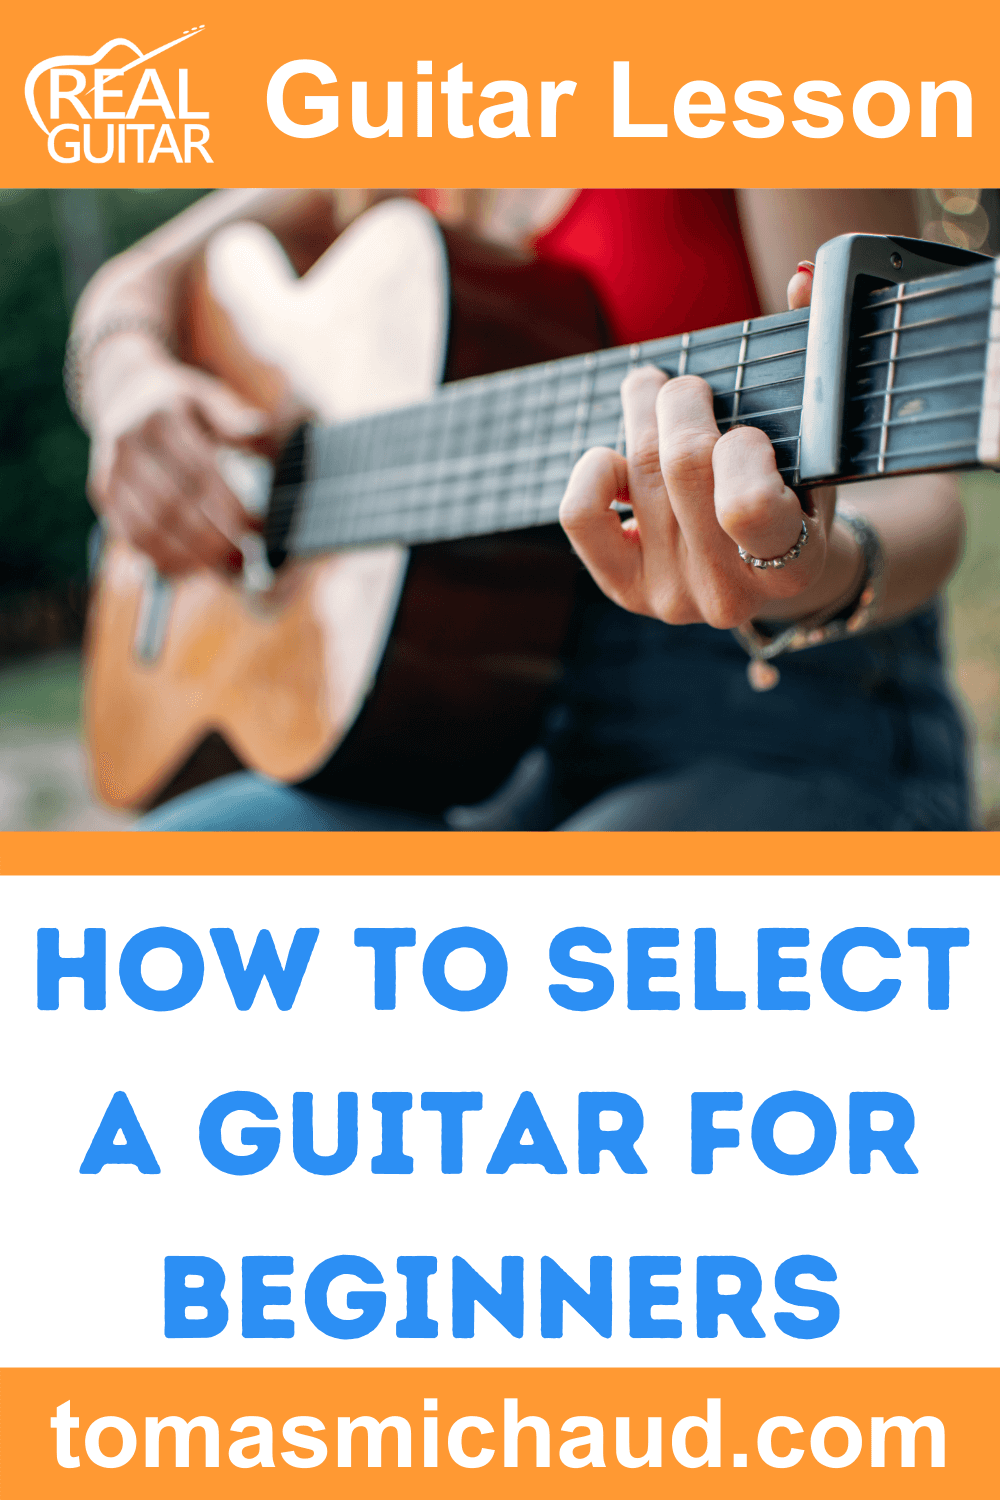 How To Select A Guitar For Beginners